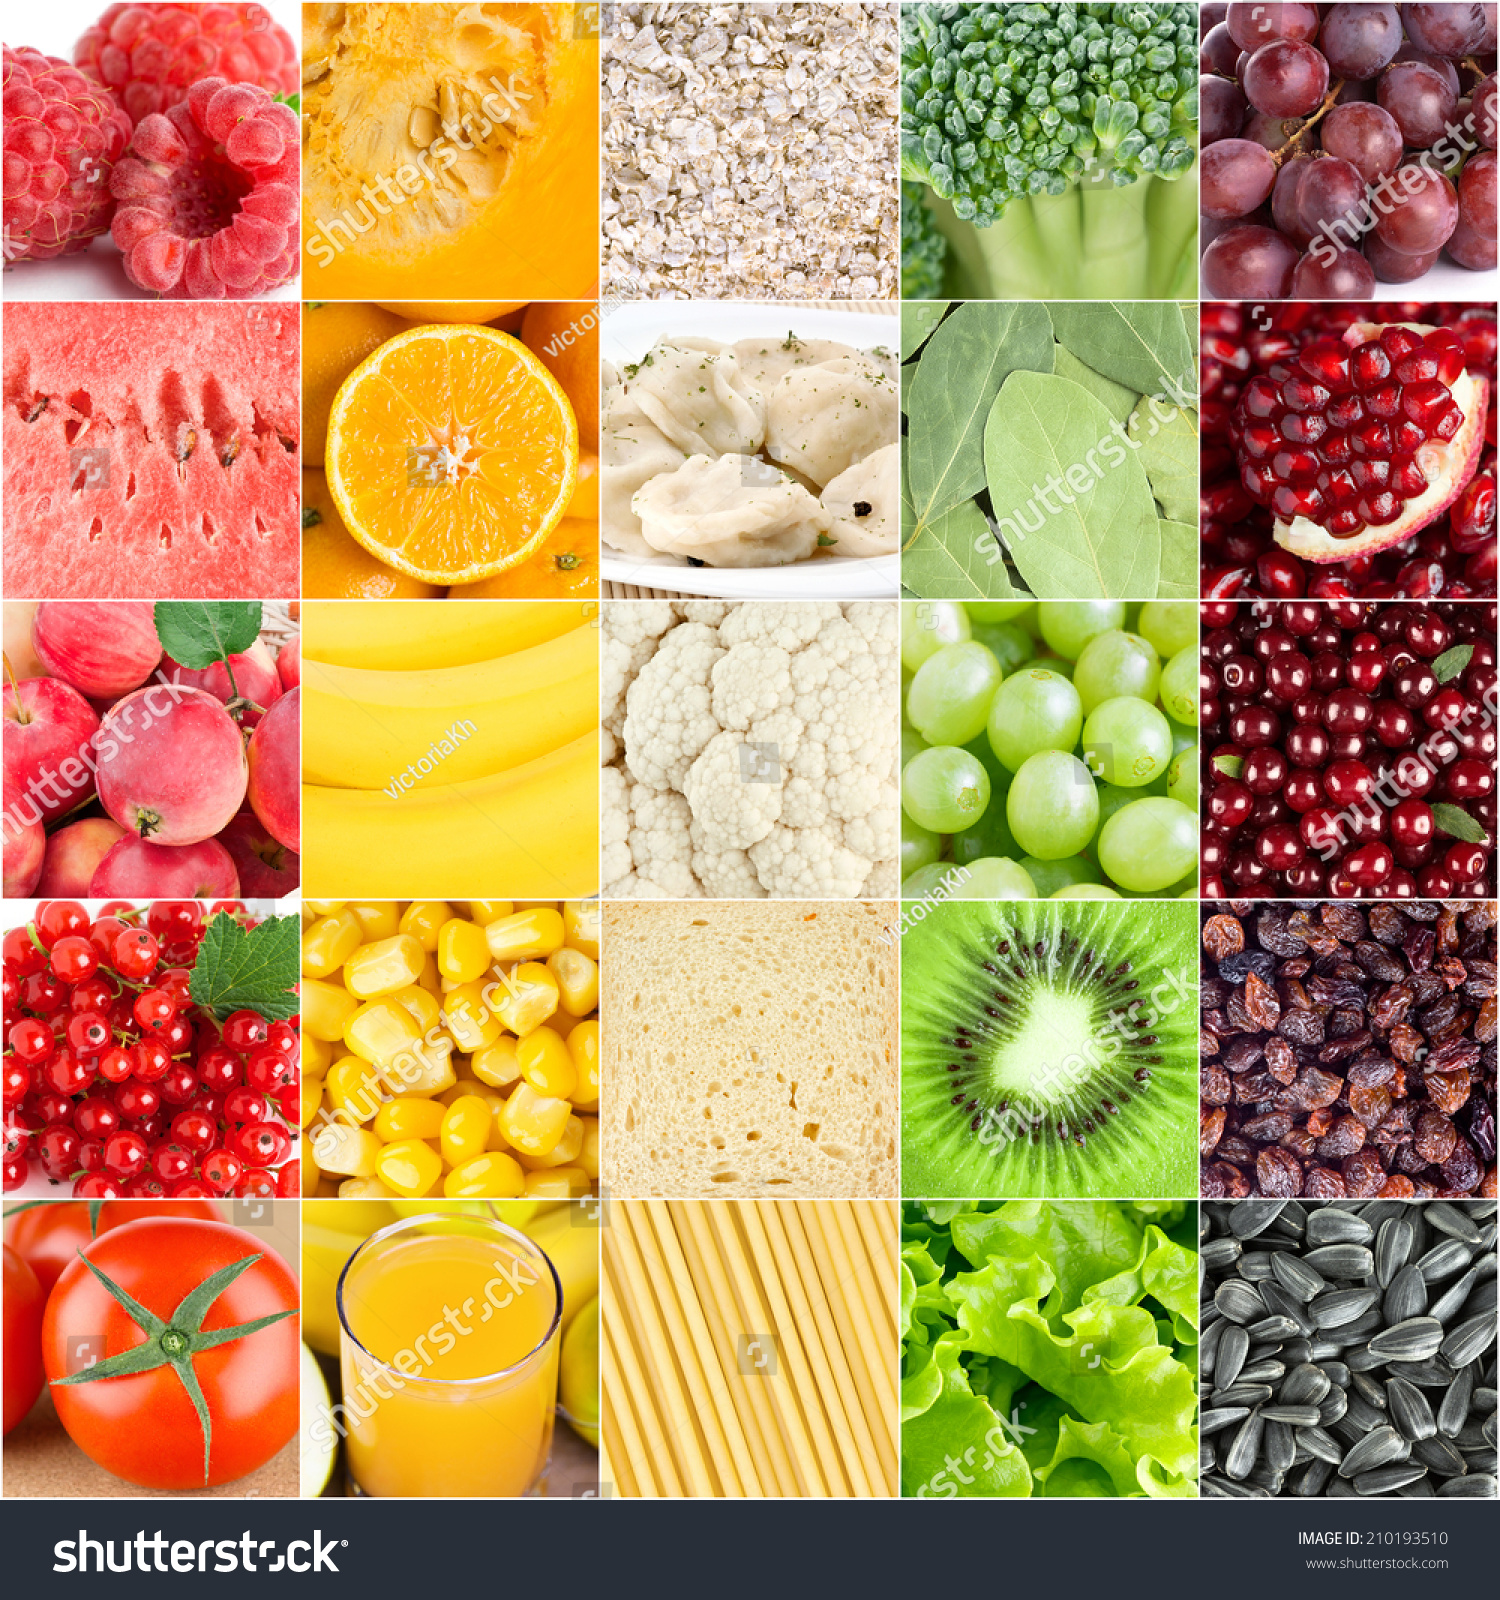 Image result for different color foods